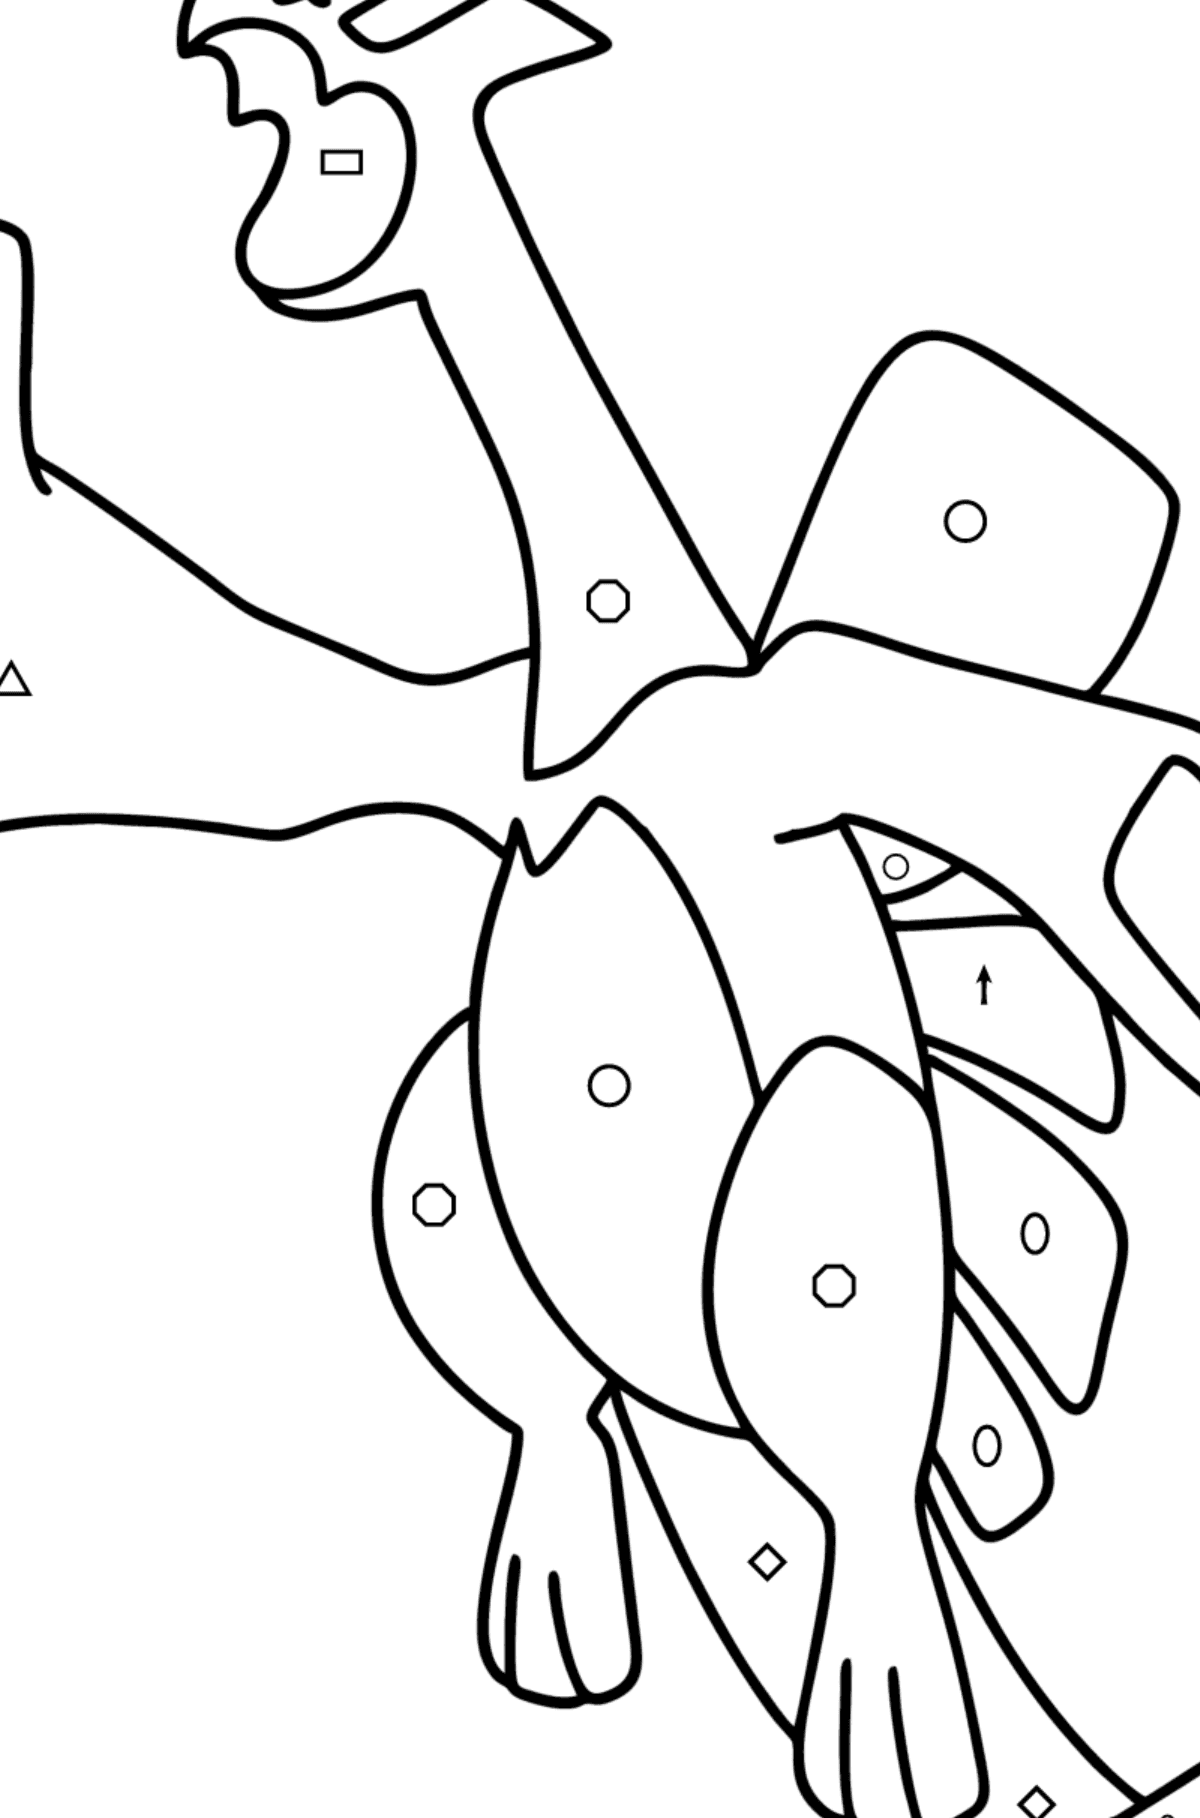 Coloring page Pokemon Go Lugia - Coloring by Symbols and Geometric Shapes for Kids